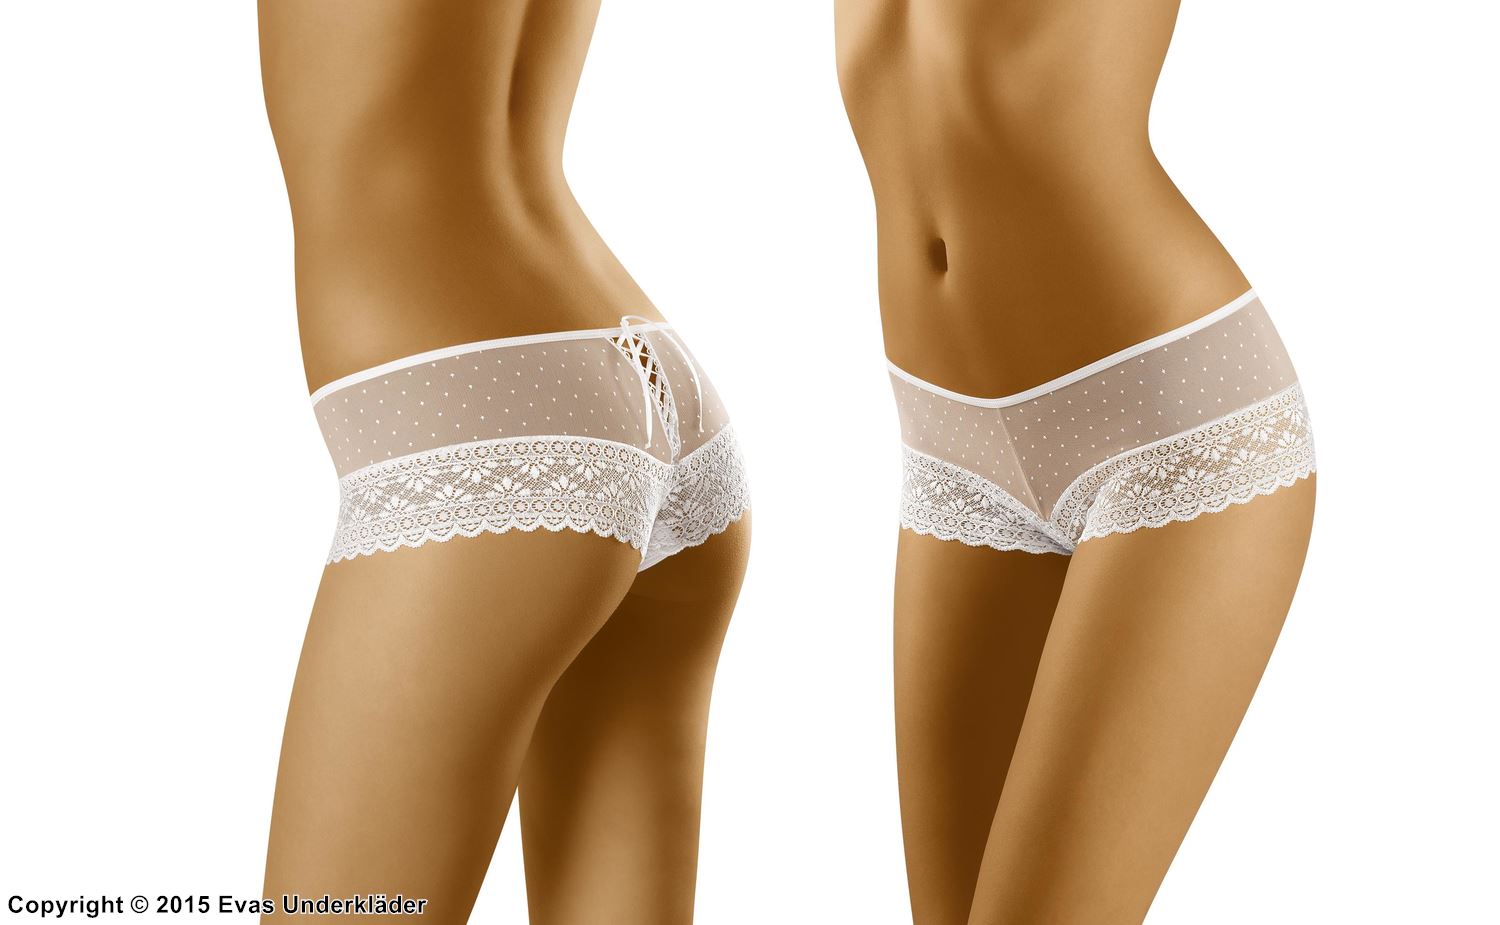 Hipster panties, lacing, wide lace edge, subtle dotted pattern